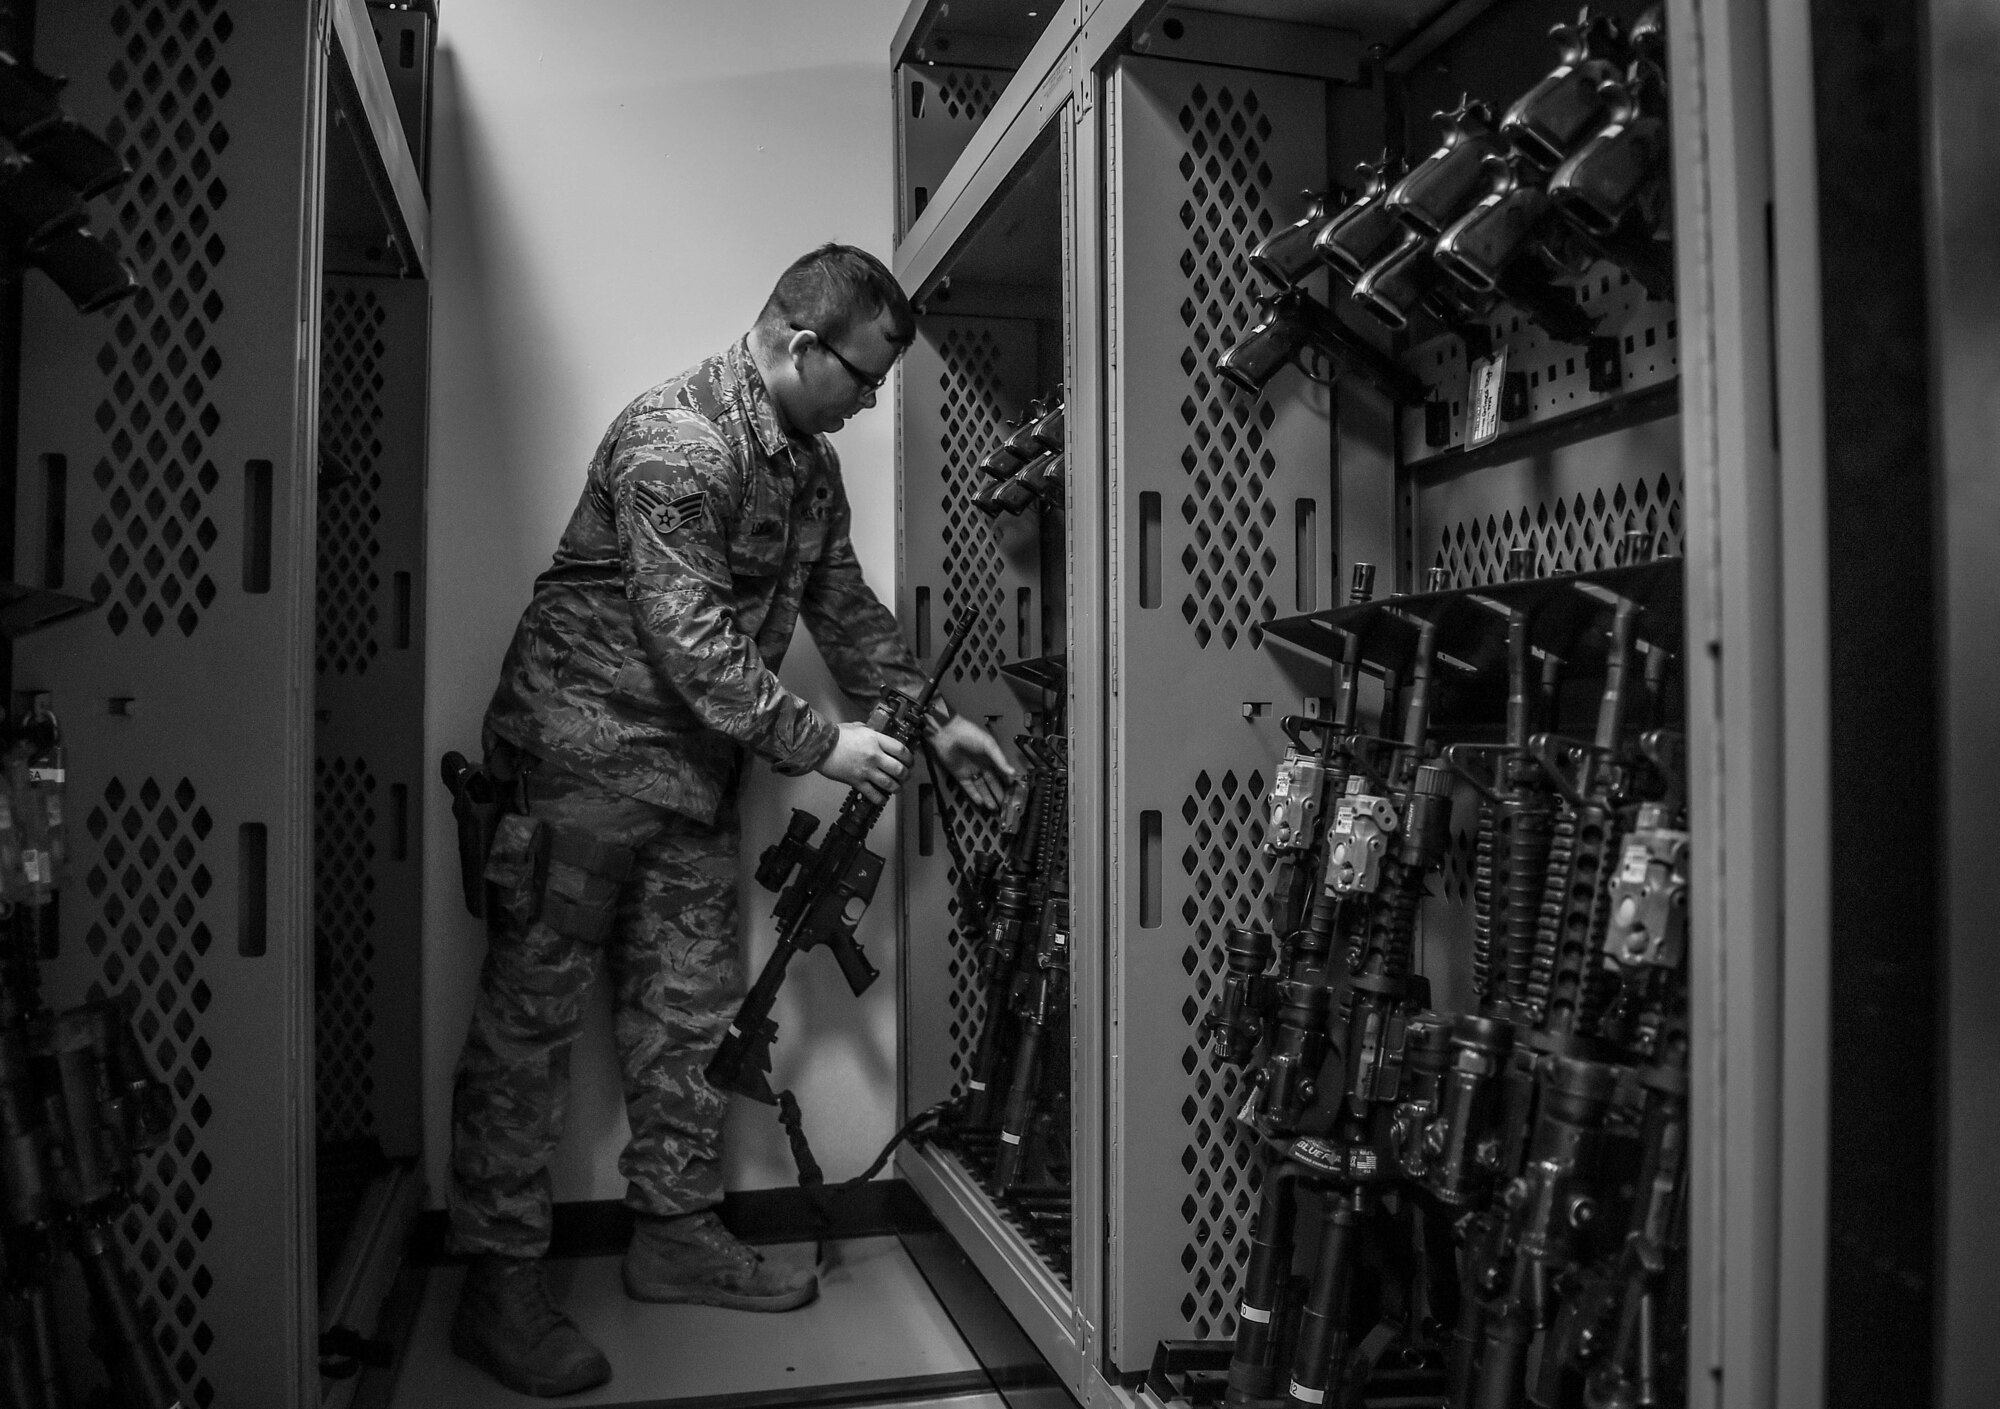 U.S. Air Force Senior Airman Cory Loicao, 627th Security Forces Squadron flight armorer, returns an M-16 rifle to the new armory rack system installed at the squadron’s armory as a part of the Reconstitute Defender Initiative (RDI) at Joint Base Lewis-McChord, Wash., April 30, 2019. Air Force leaders declared 2019 the – Year of the Defender – and committed to implementing the RDI to provide better funding and opportunities to security forces squadrons throughout the Air Force.  (U.S. Air Force photo by Senior Airman Tryphena Mayhugh)